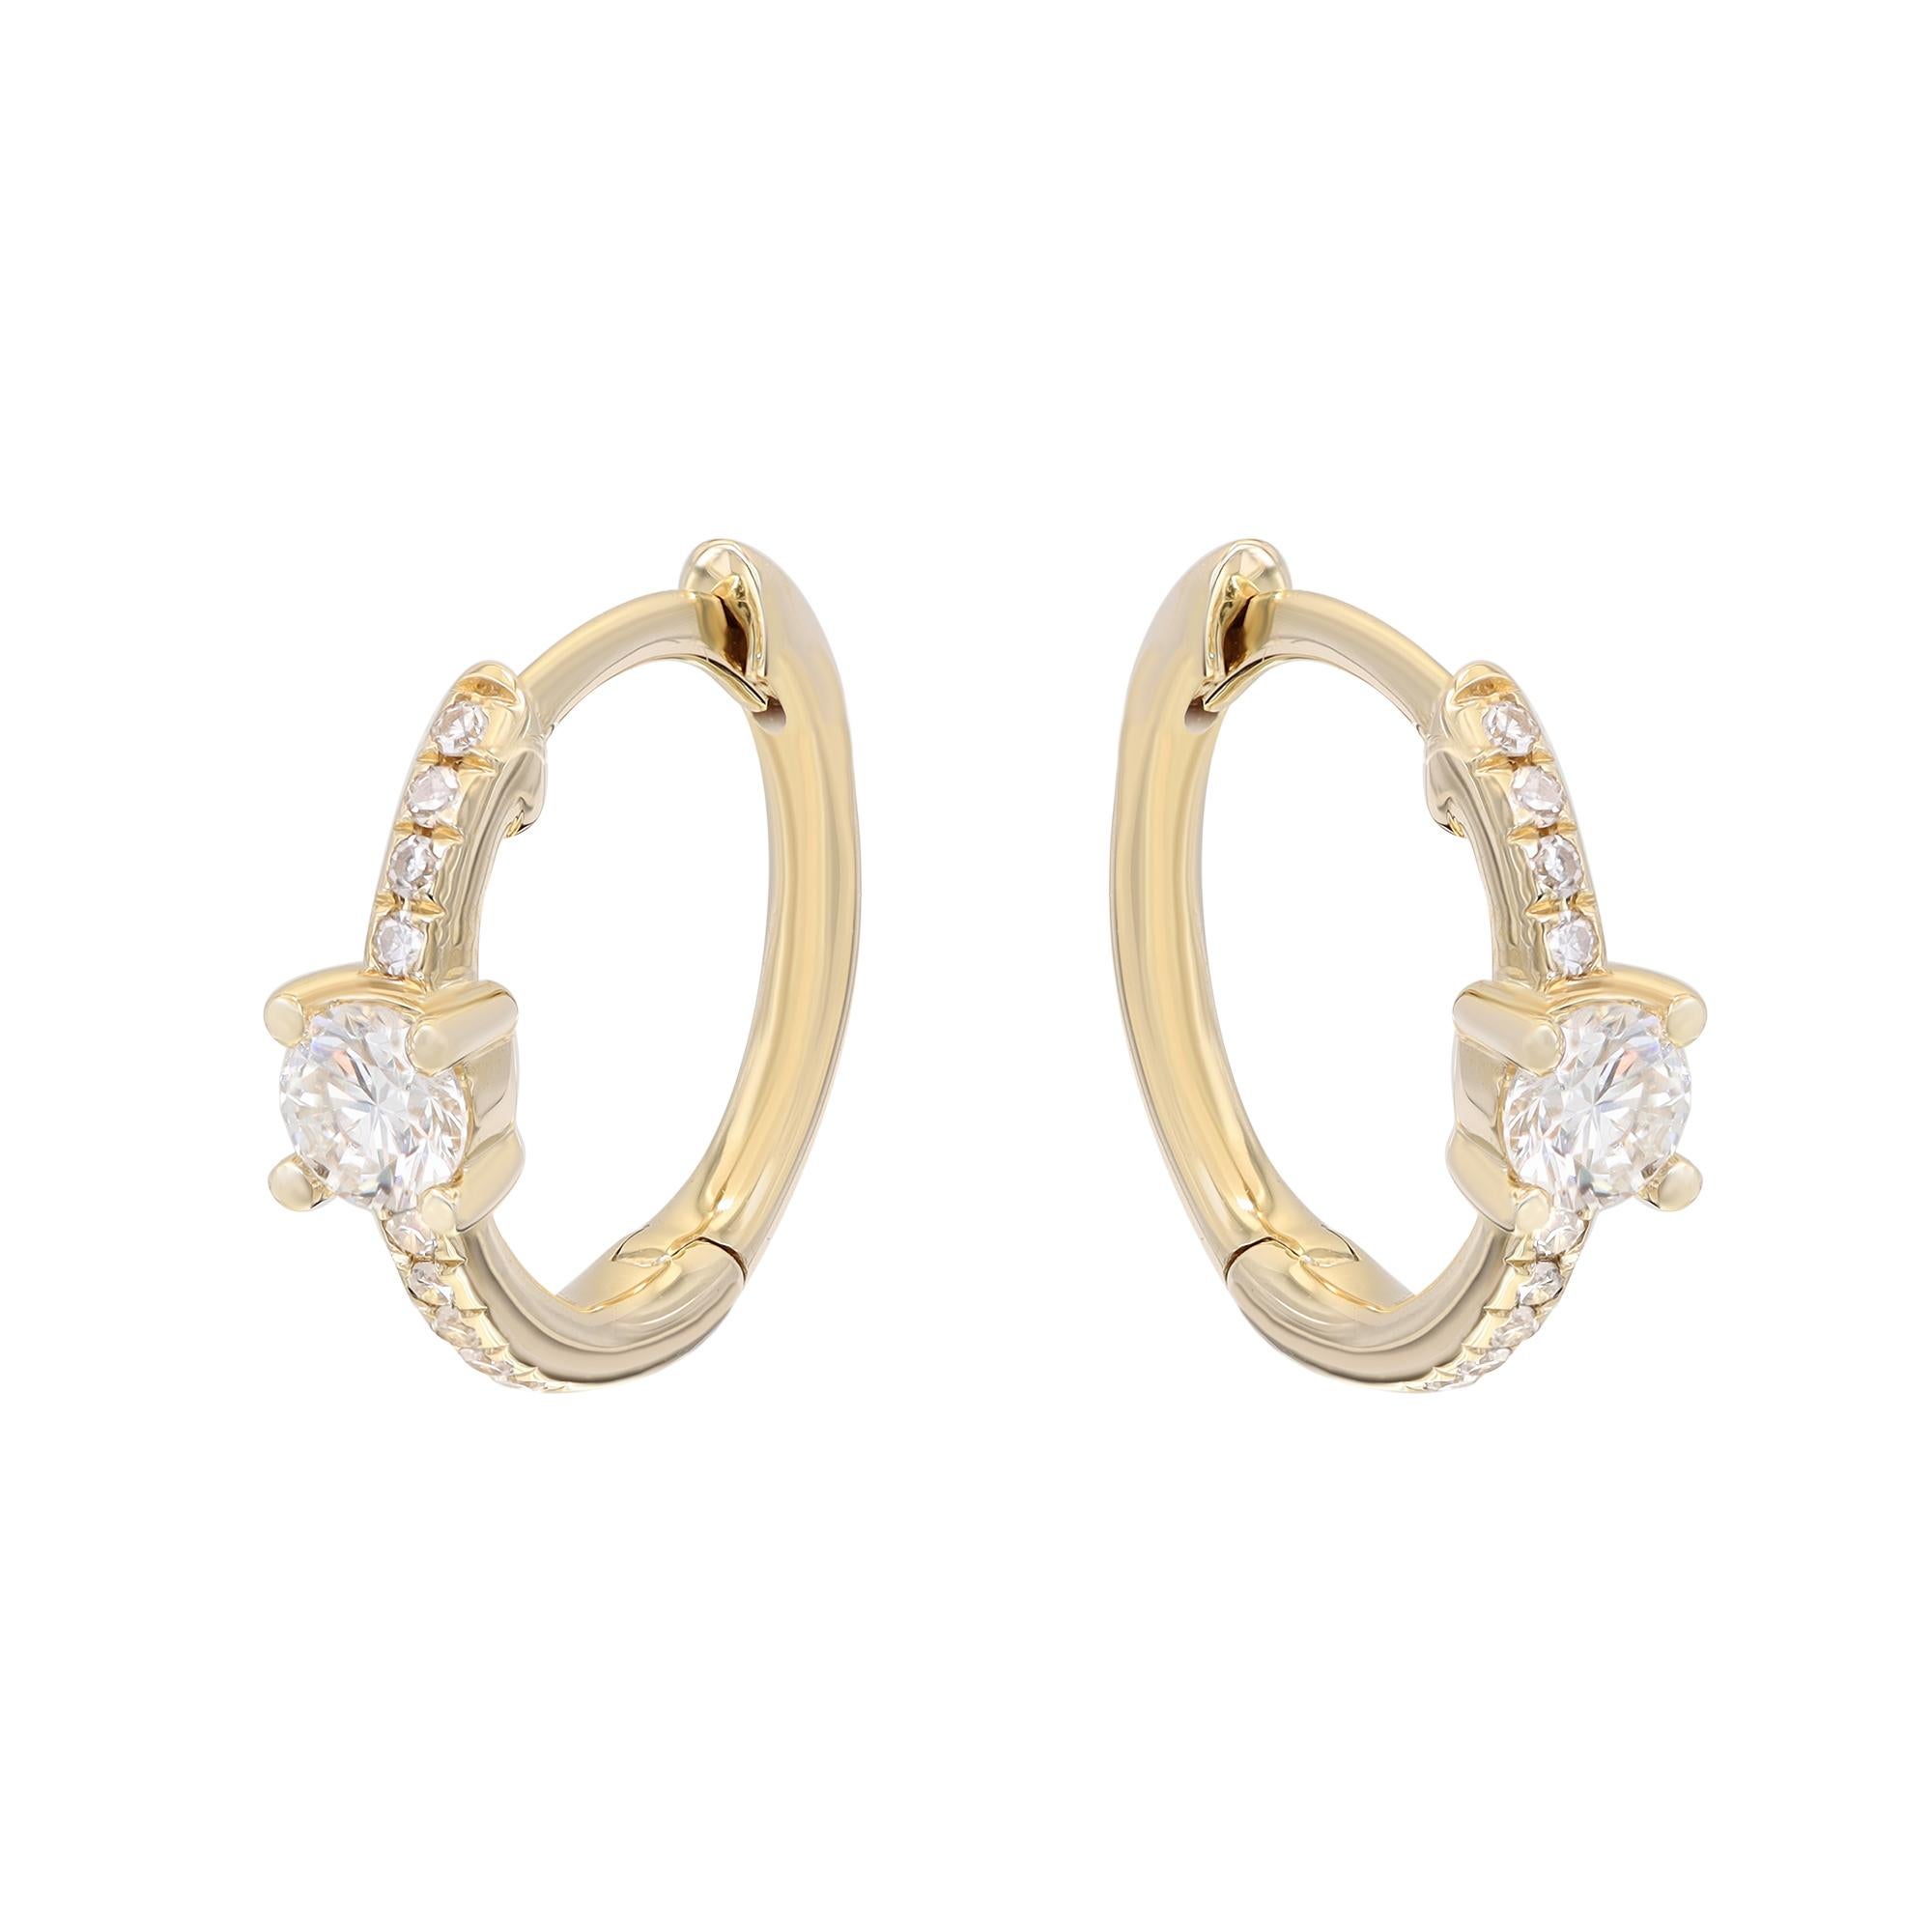 Dainty and dazzling diamond round huggie earrings, perfect for a great everyday look. These earrings are crafted in fine high polished 14K yellow gold and encrusted with bright white round cut diamonds weighing 0.25 carat. Diamond color G-H and